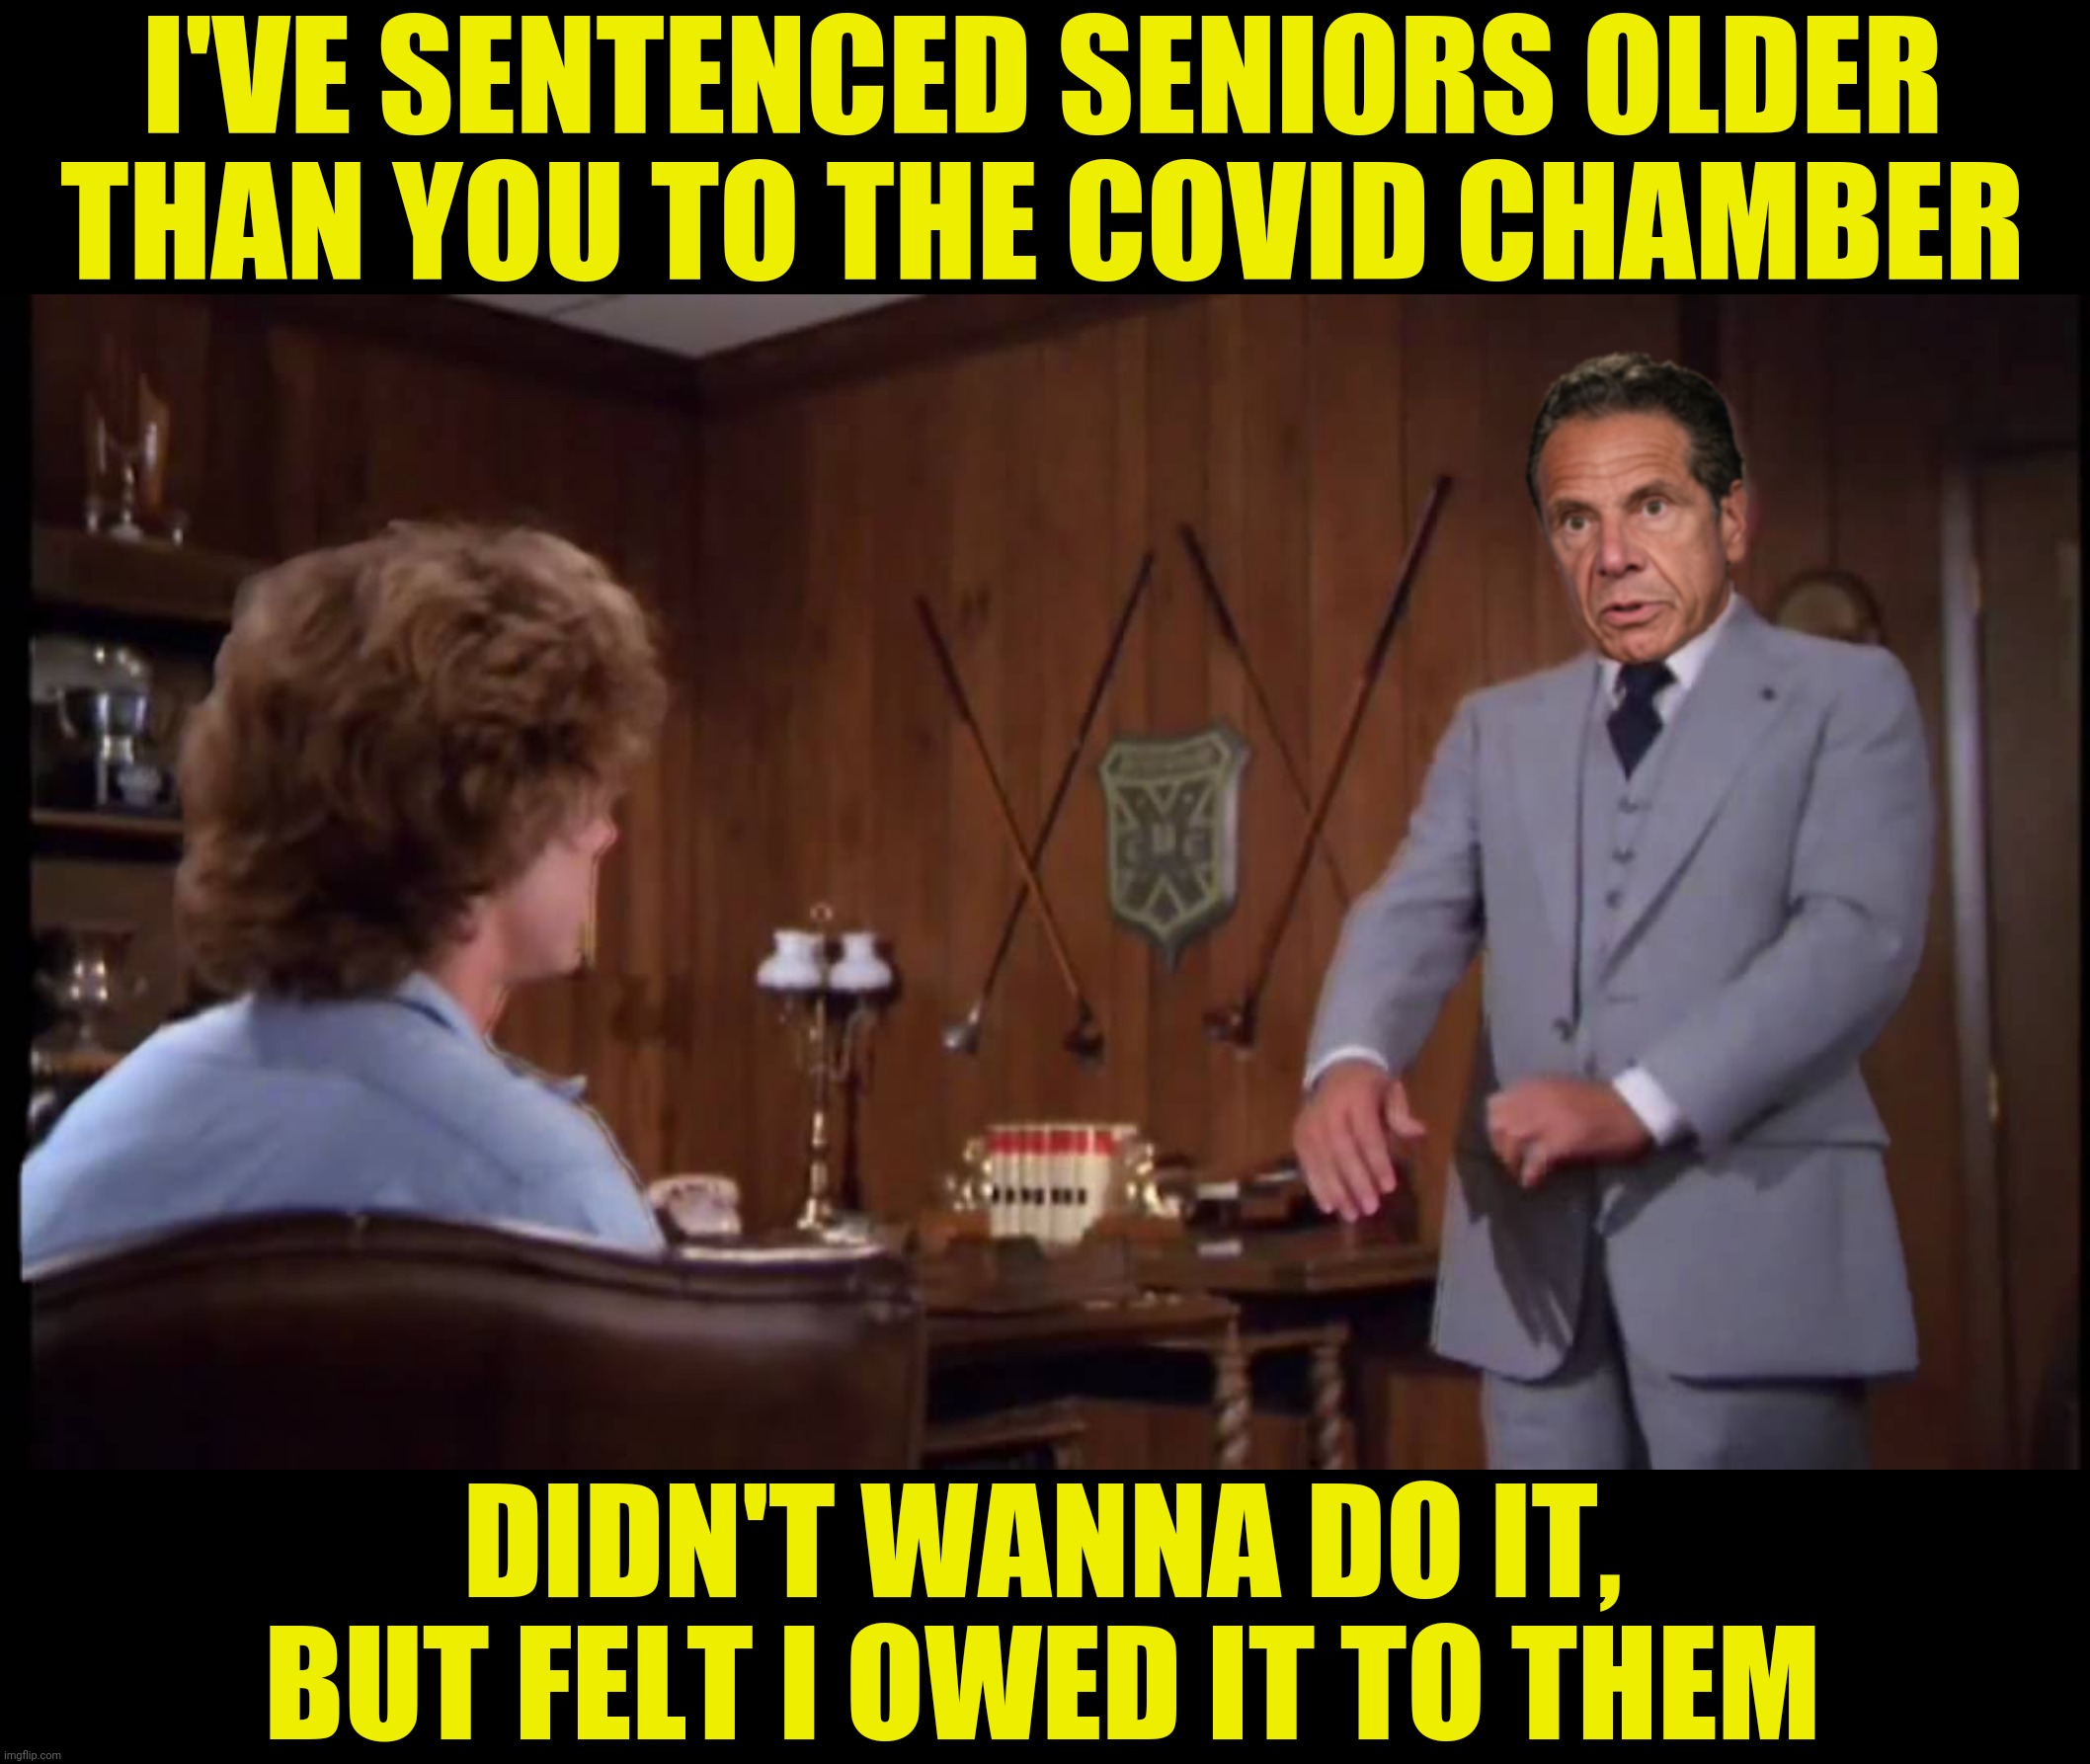 How about a Fresca? |  I'VE SENTENCED SENIORS OLDER THAN YOU TO THE COVID CHAMBER; DIDN'T WANNA DO IT,
BUT FELT I OWED IT TO THEM | image tagged in bad photoshop,caddyshack,andrew cuomo,judge smails | made w/ Imgflip meme maker